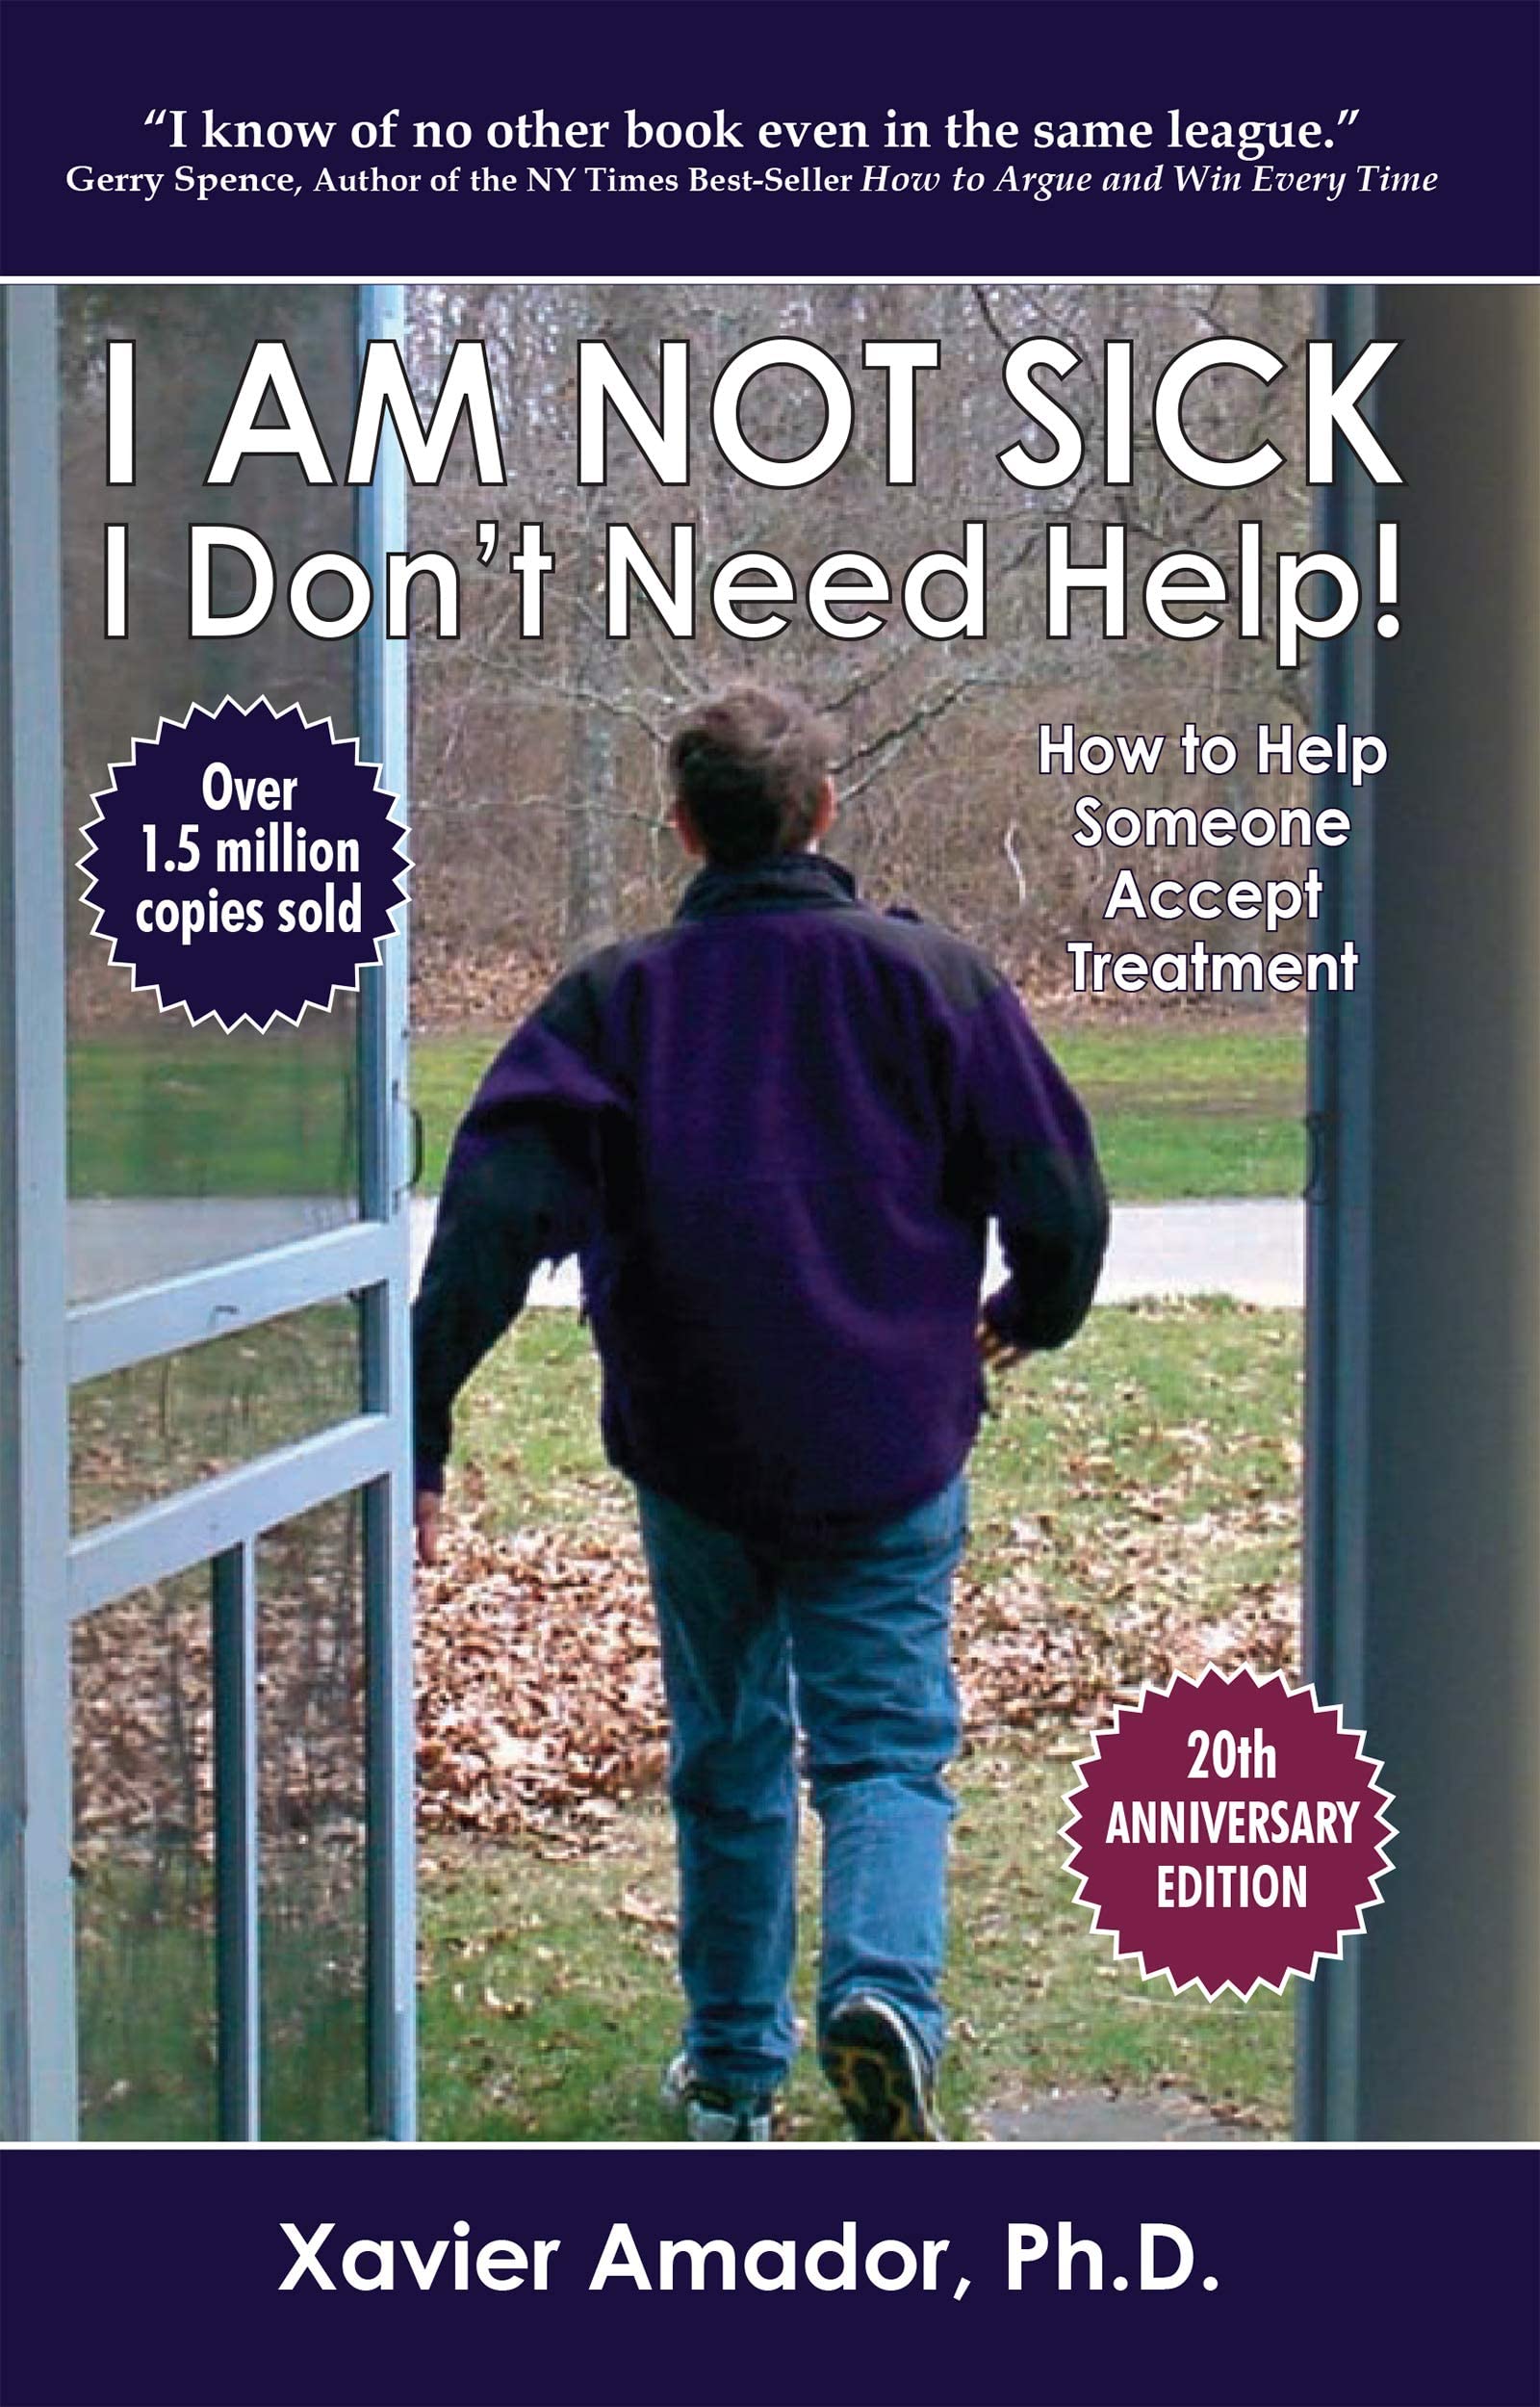 Book Cover - I Am Not Sick, I Don't Need Help! How to Help Someone Accept Treatment - 20th Anniversary by Dr. Xavier Amador (2020)